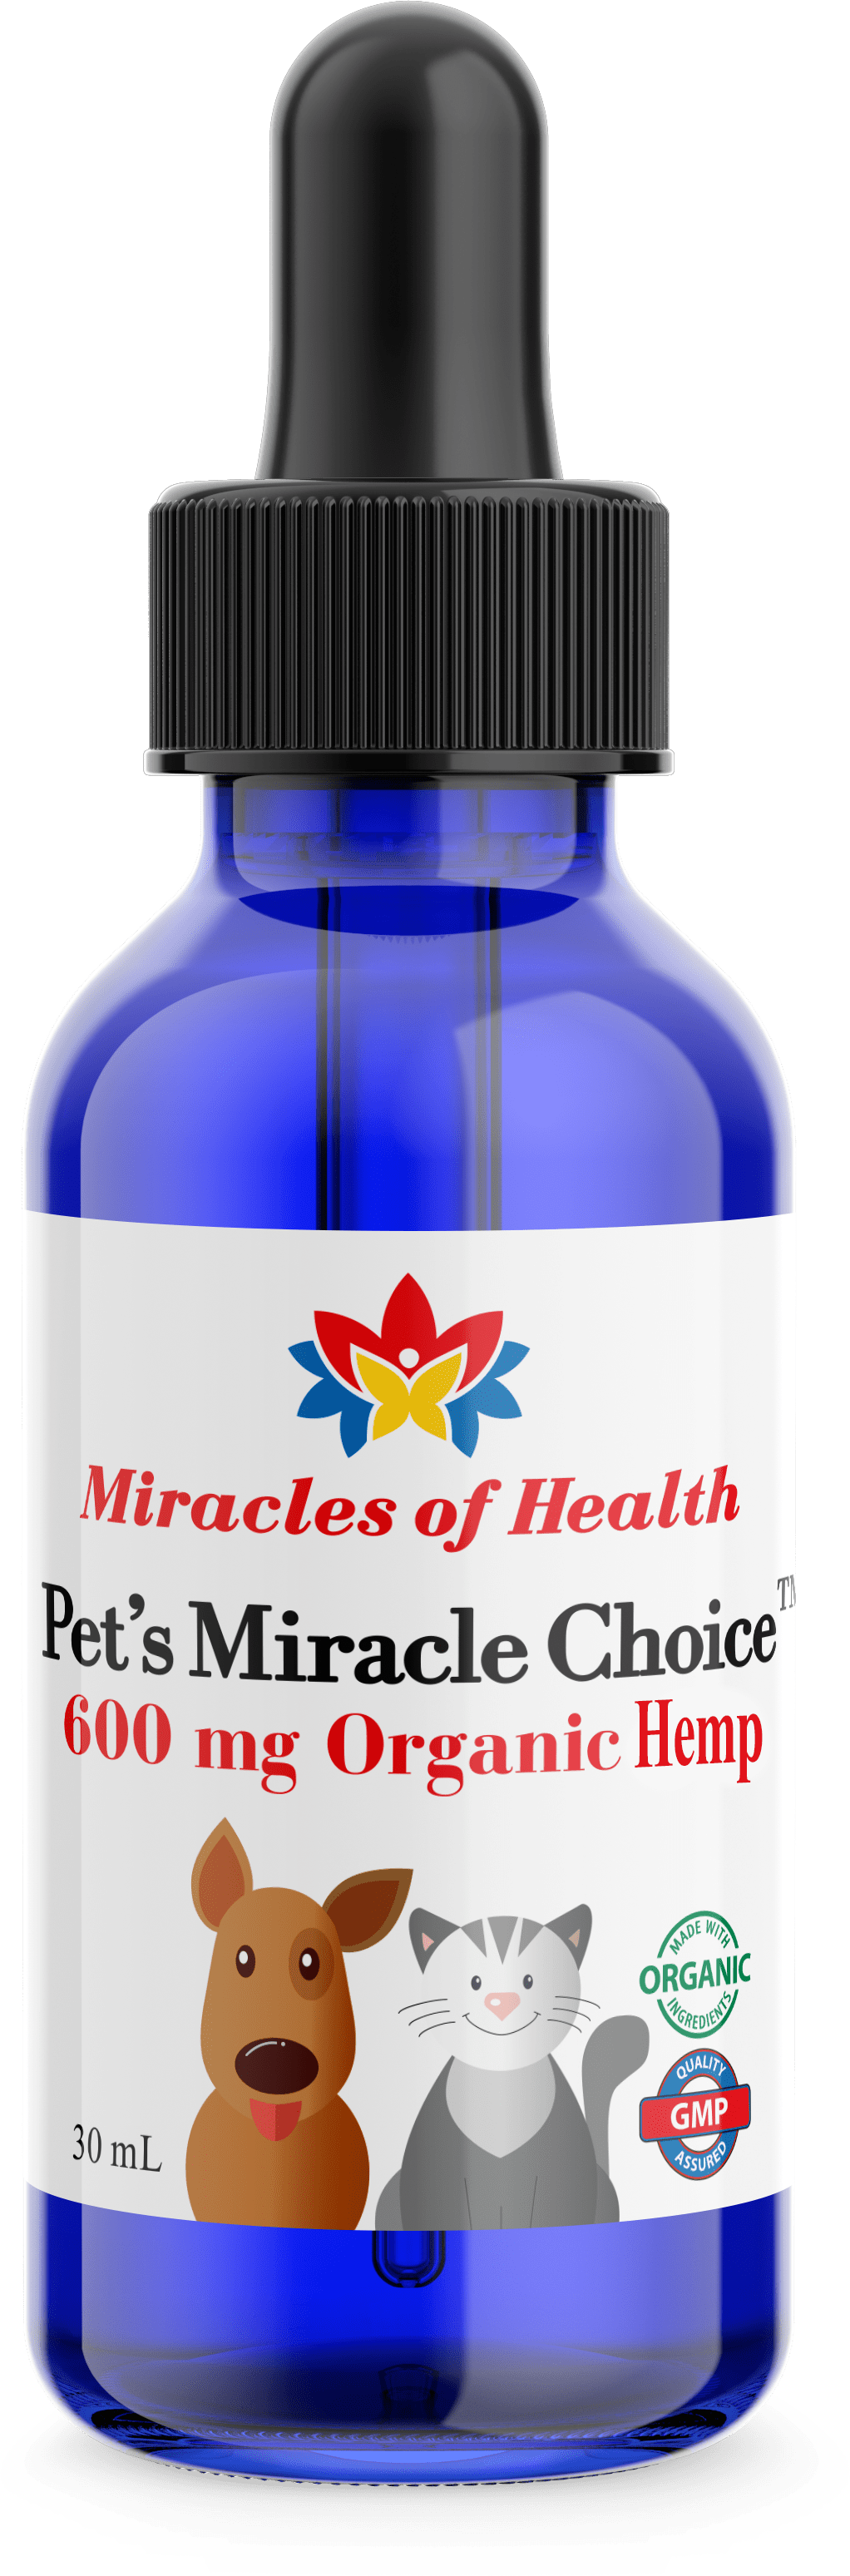 Miracles of Health